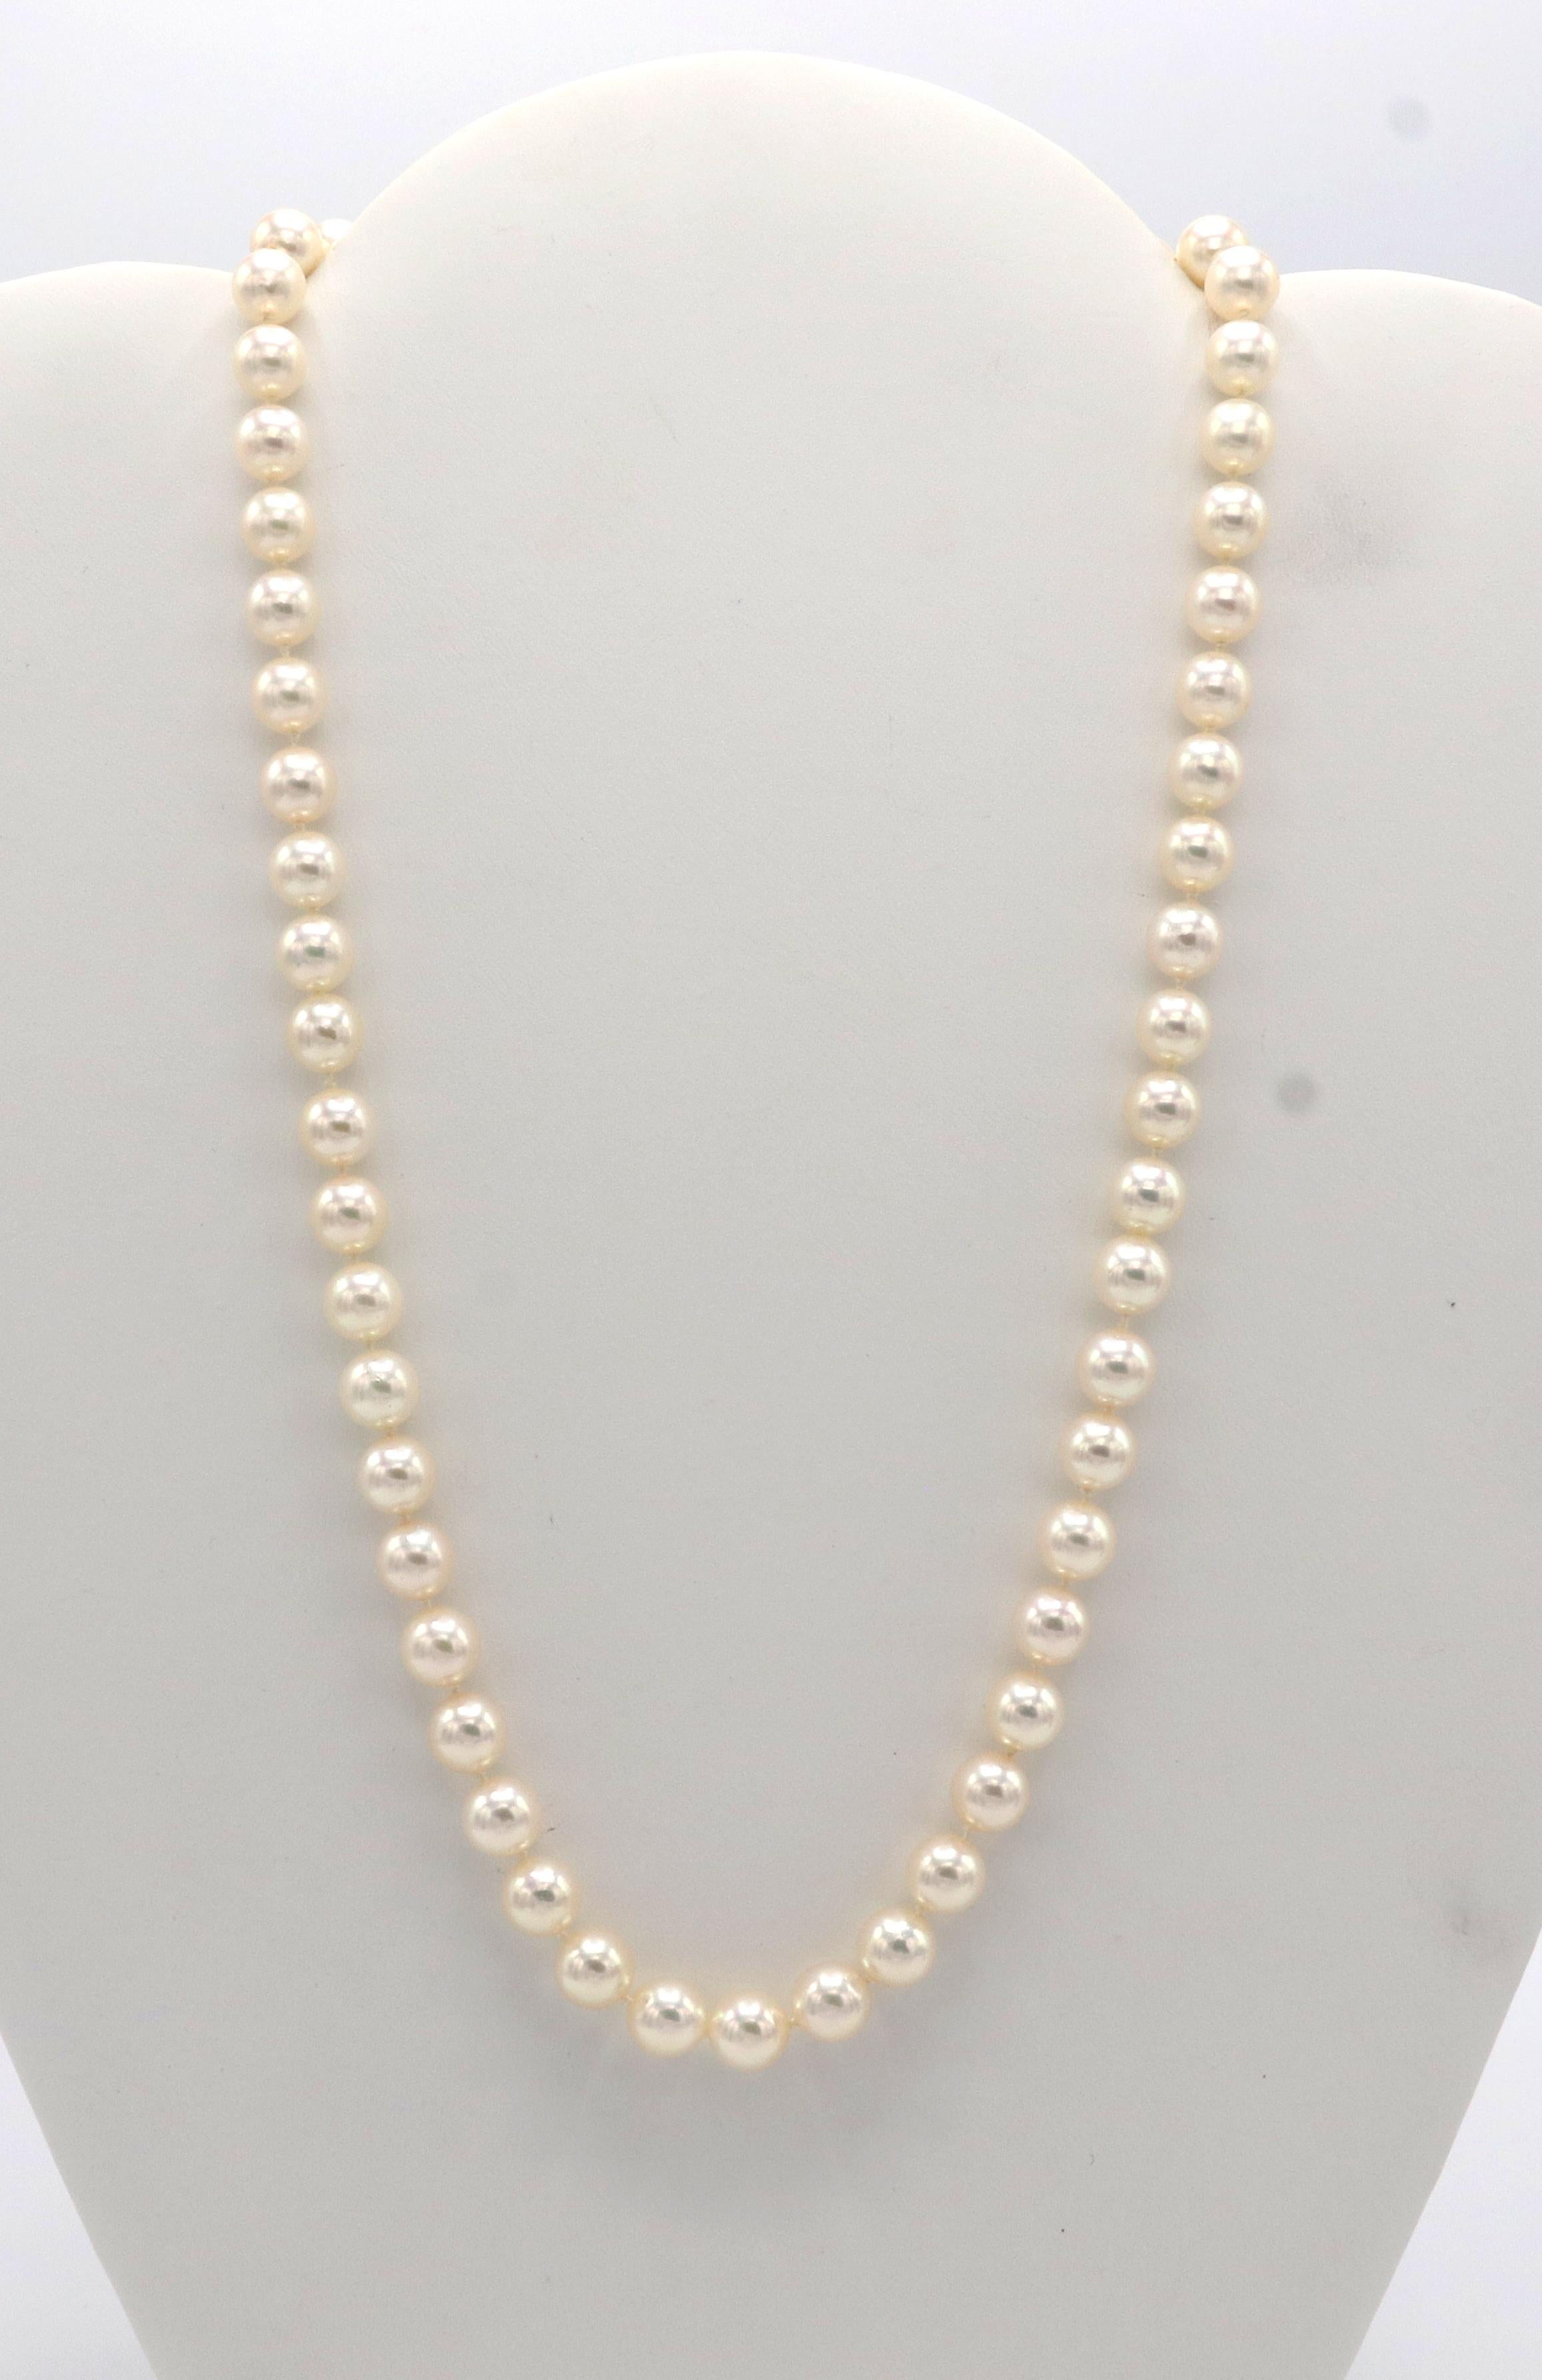 Tiffany & Co. Cultured Pearl 18 Karat White Gold Necklace 
Metal: 18k white gold
Weight: 38.05 grams
Length: 18 inches
Pearls: 7.5mm cultured pearls with a creamy luster
